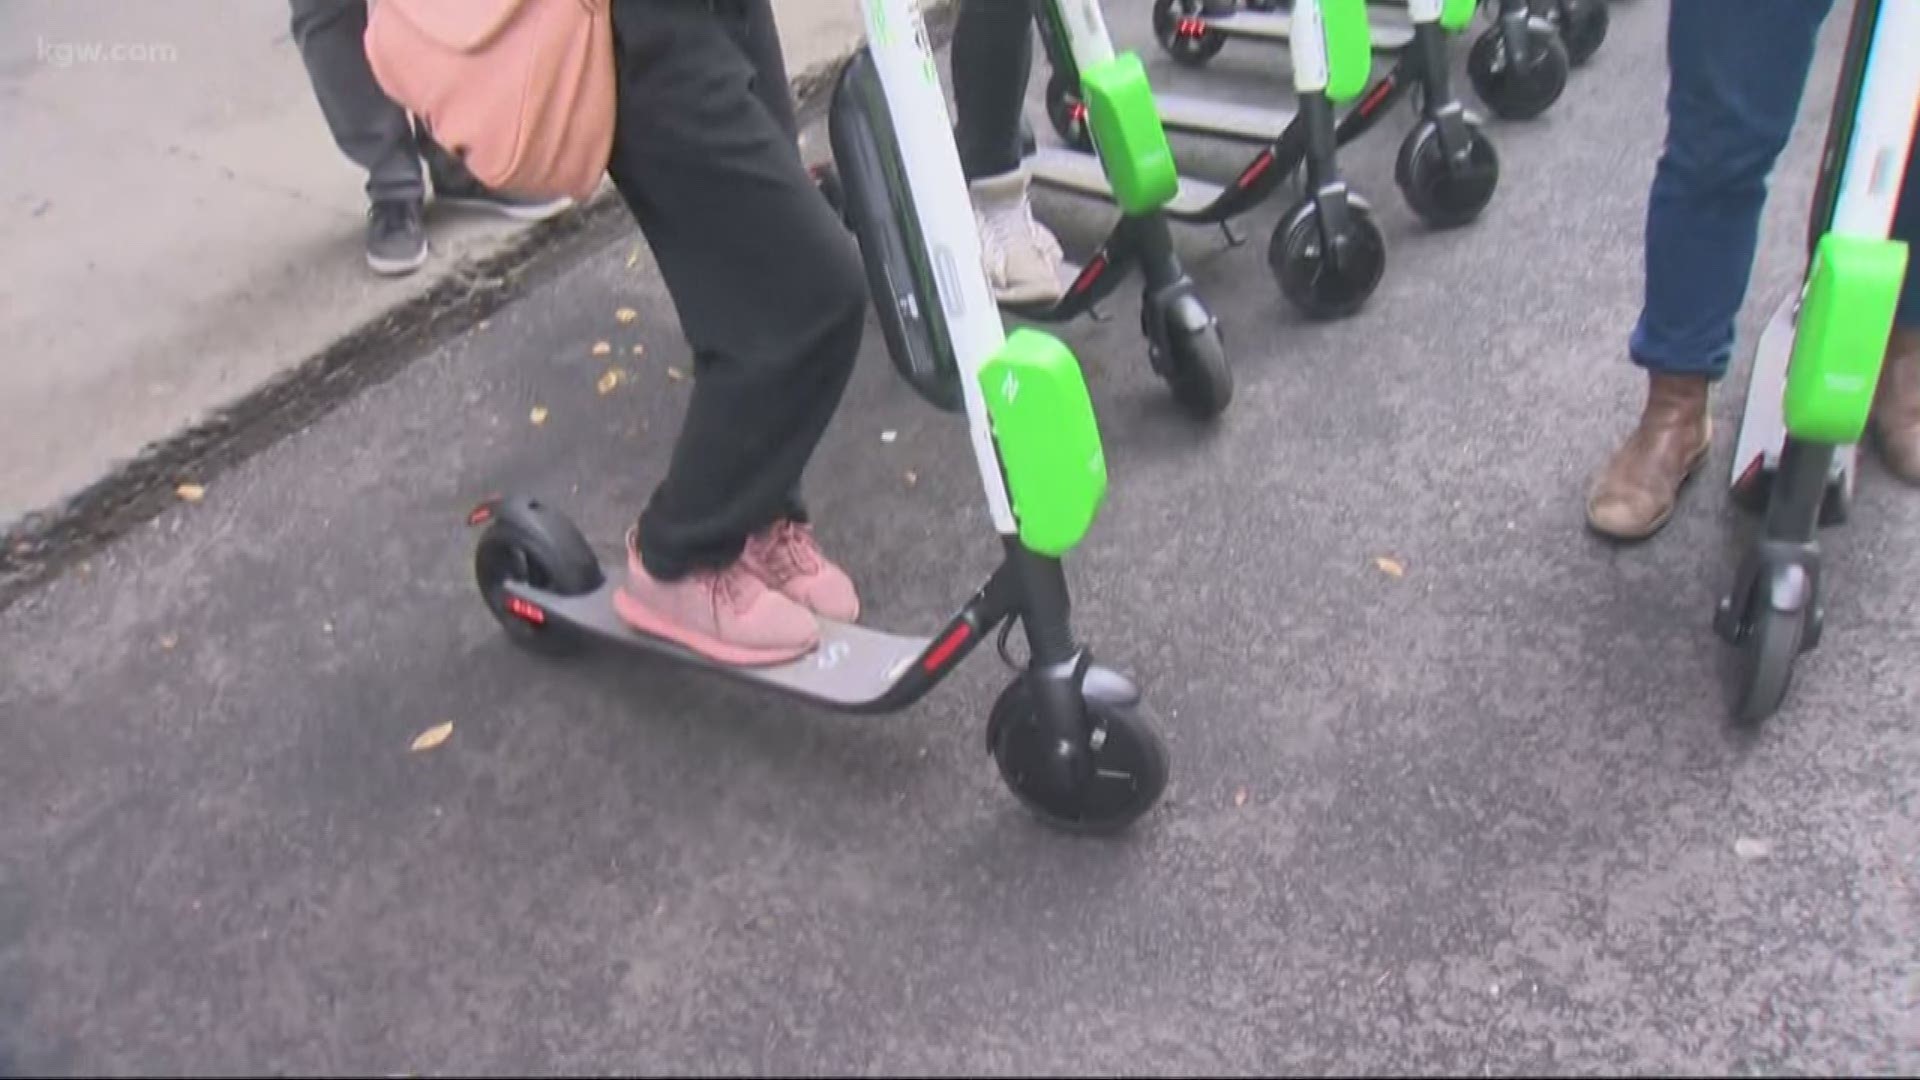 PBOT says many people commute to work on scooters.